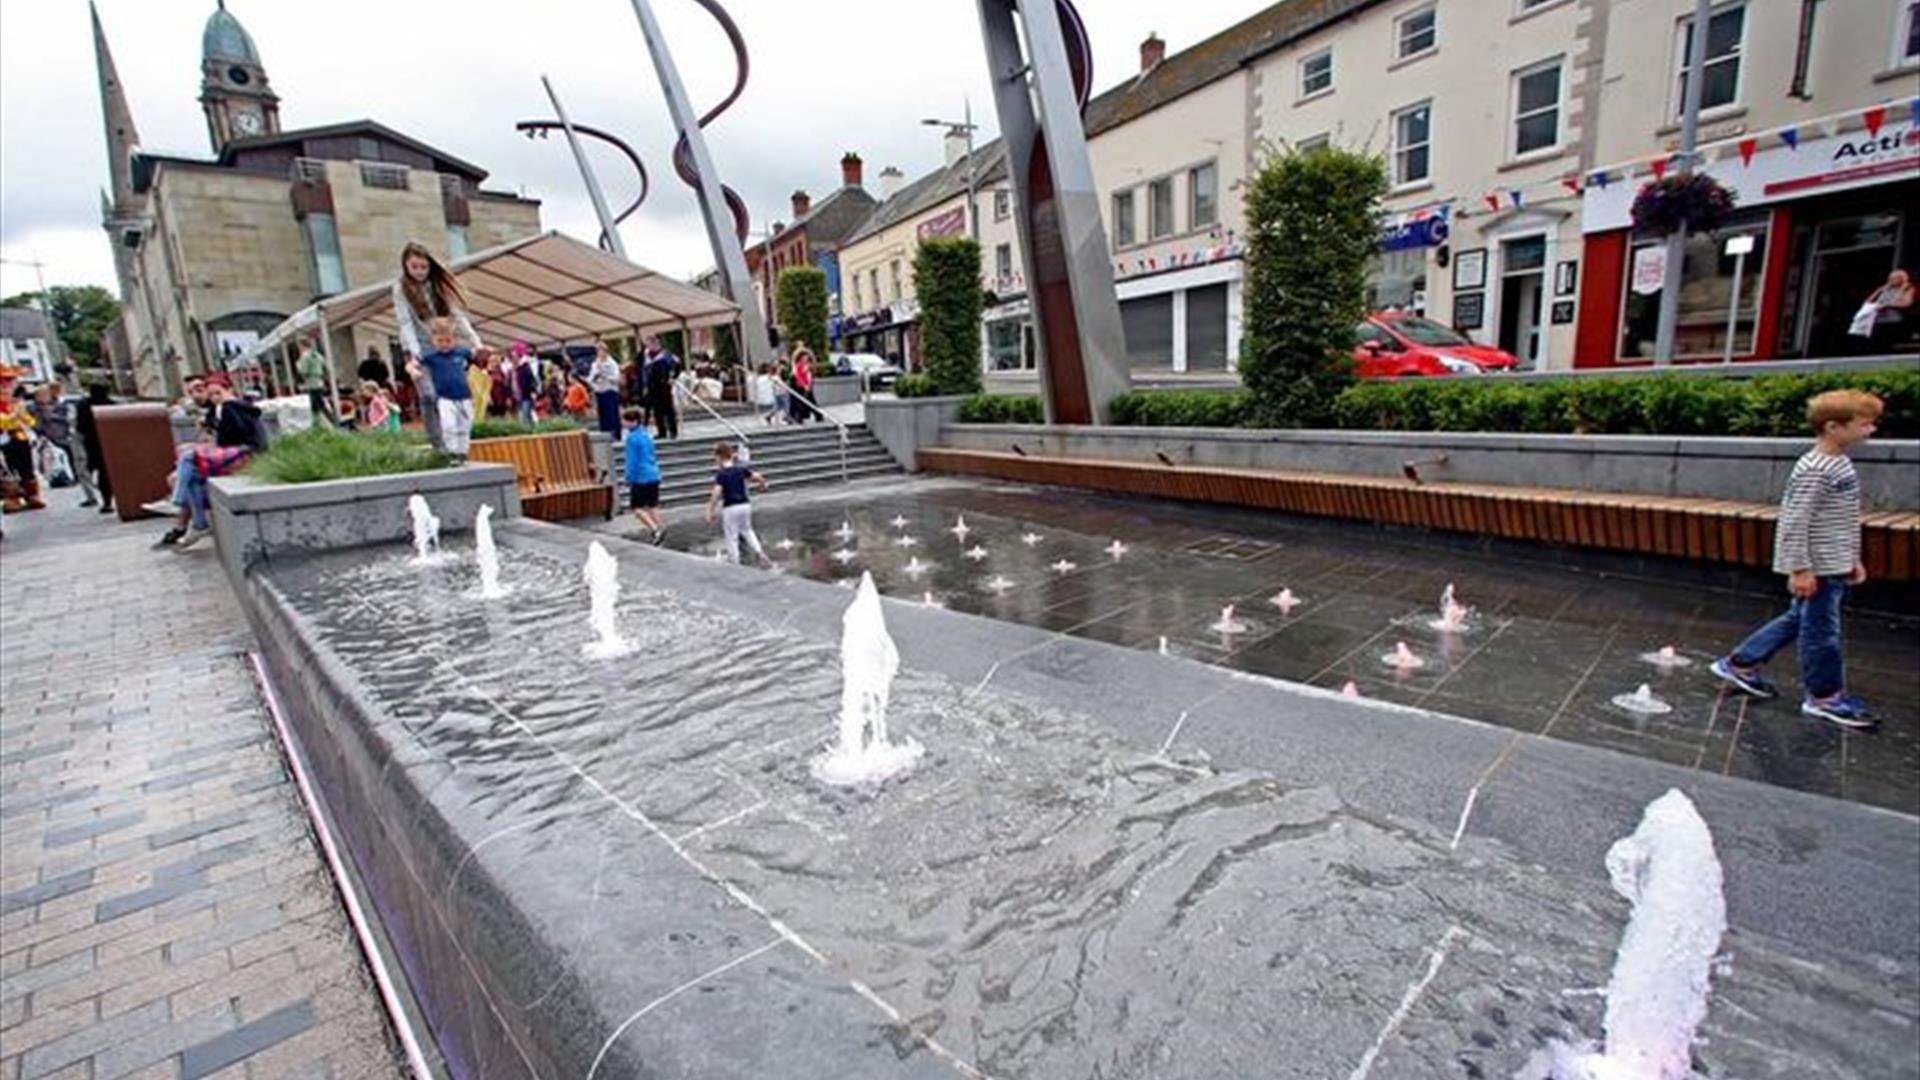 The fountains in Market Square with the Irish Linen Centre & Lisburn Museum in the background